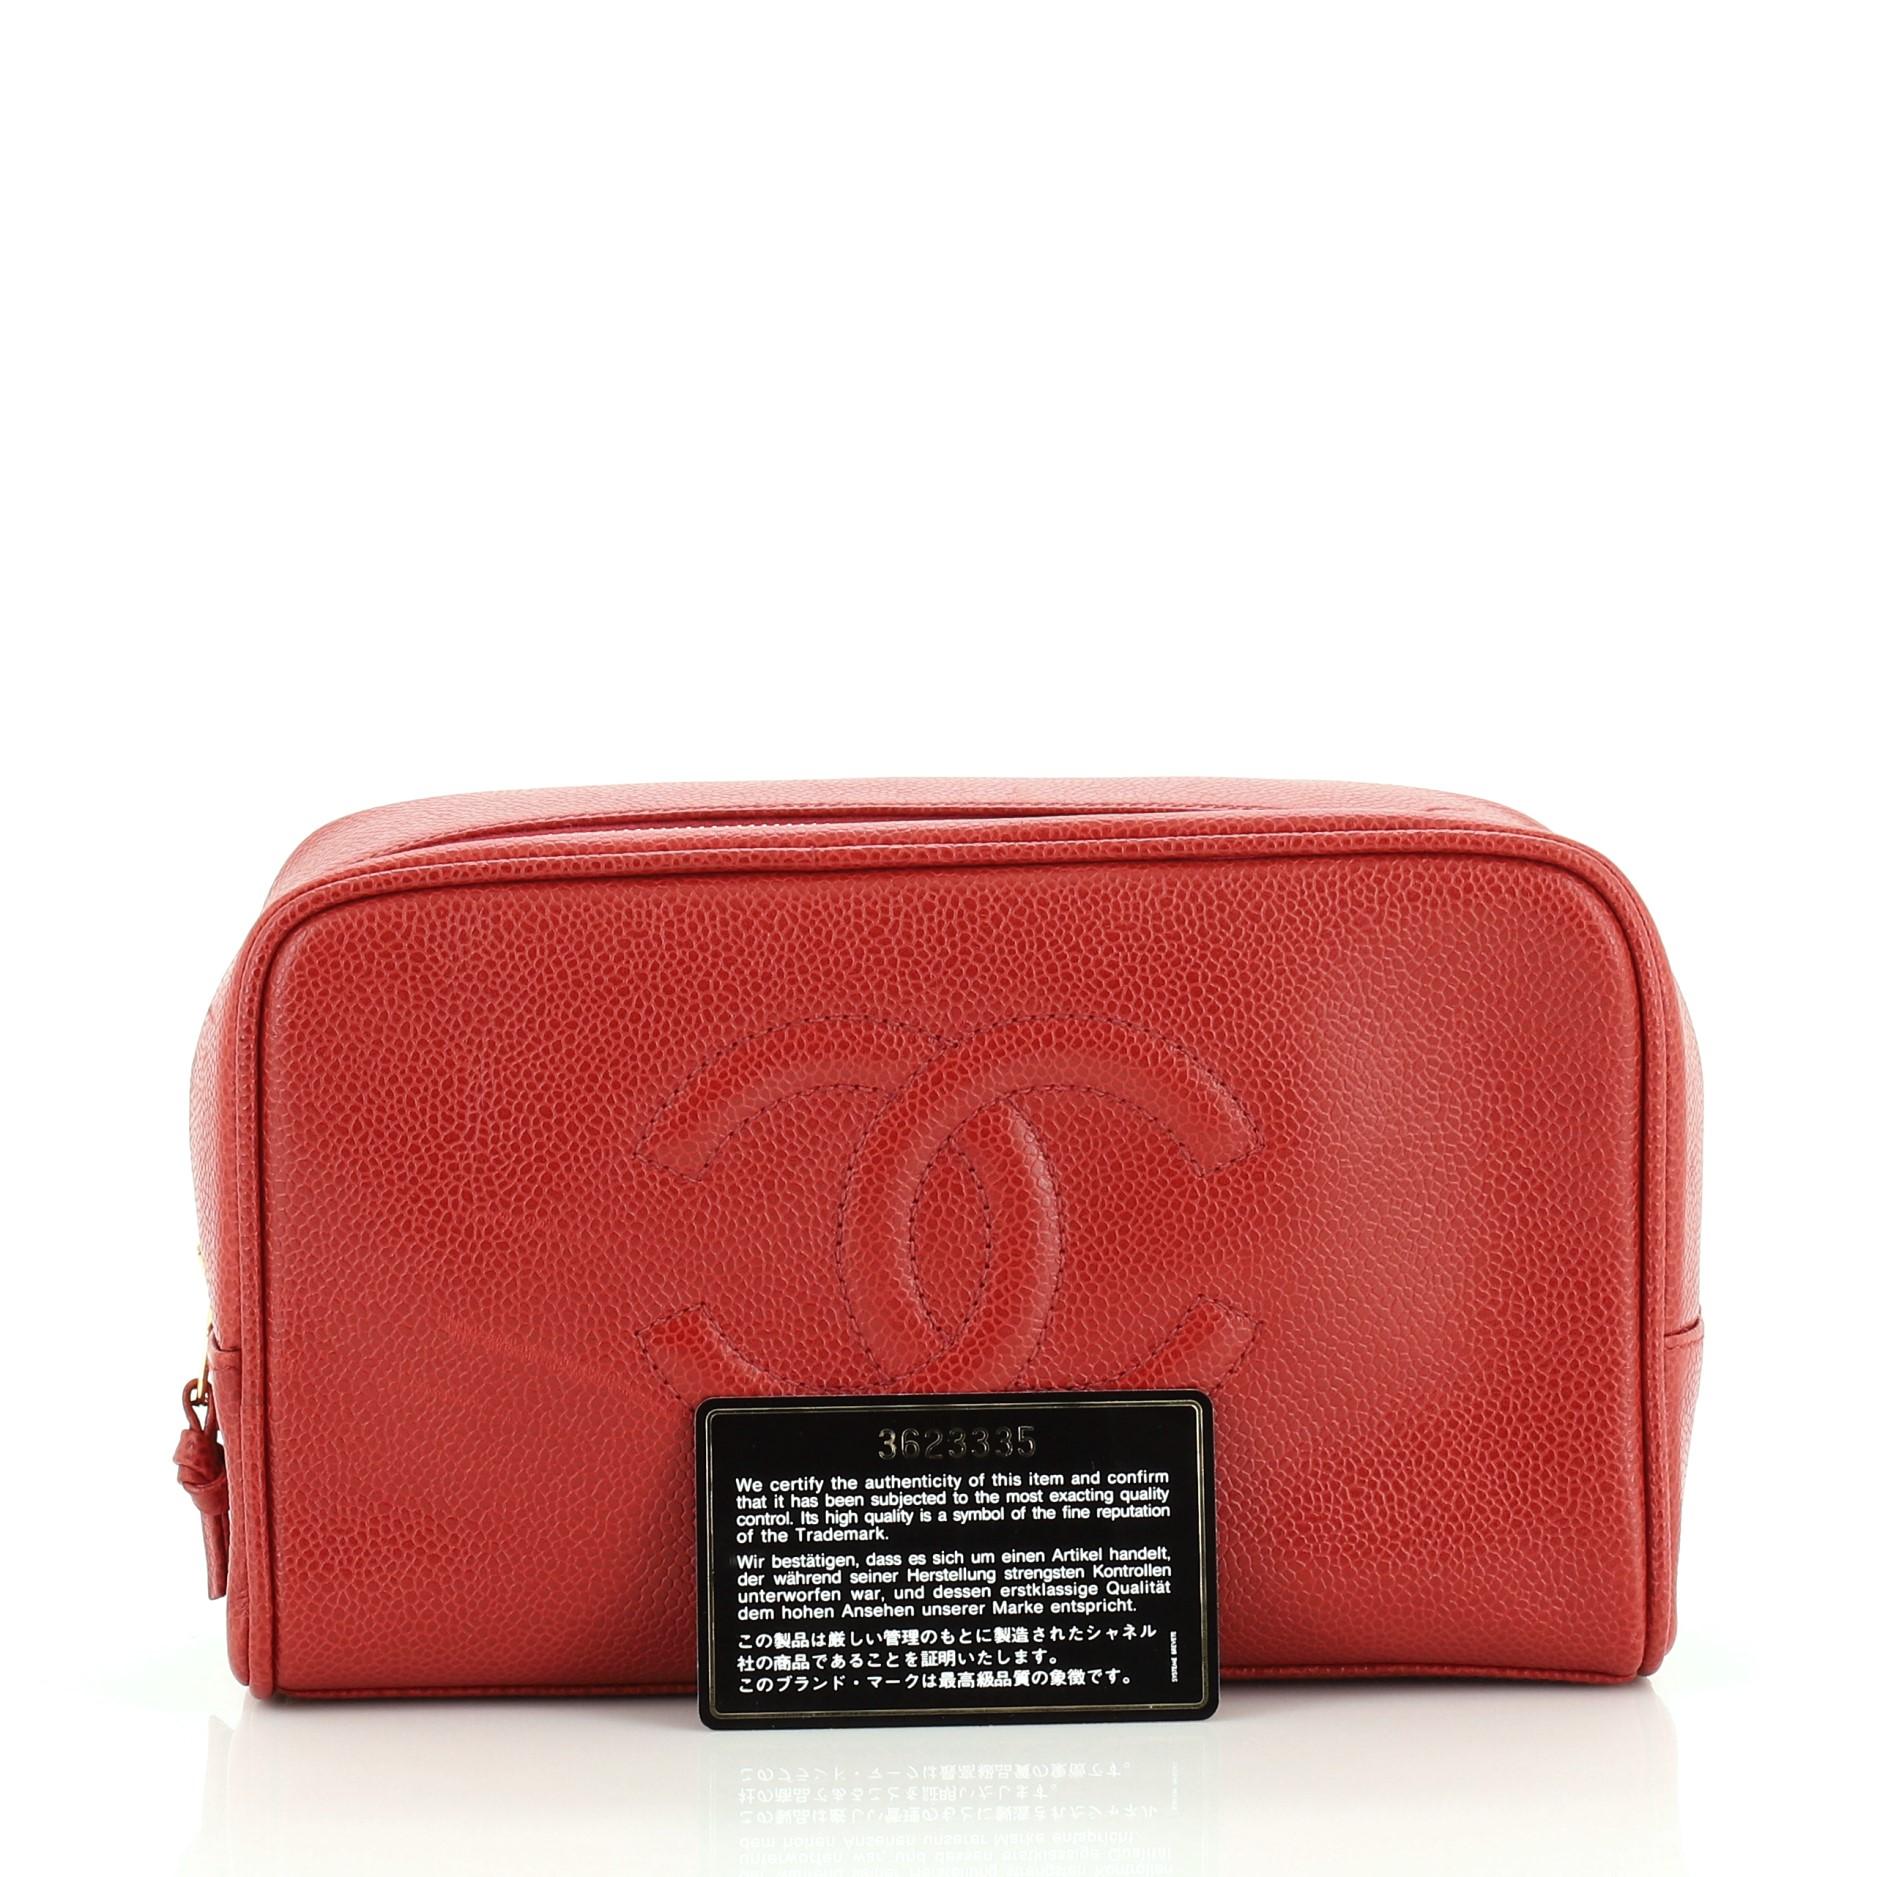 This Chanel Vintage CC Toiletry Pouch Caviar, crafted in red caviar leather, features a stitched CC logo and gold-tone hardware. Its zip closure opens to a red leather interior with zip pocket. Hologram sticker reads: 3623335.

Condition: Very good.